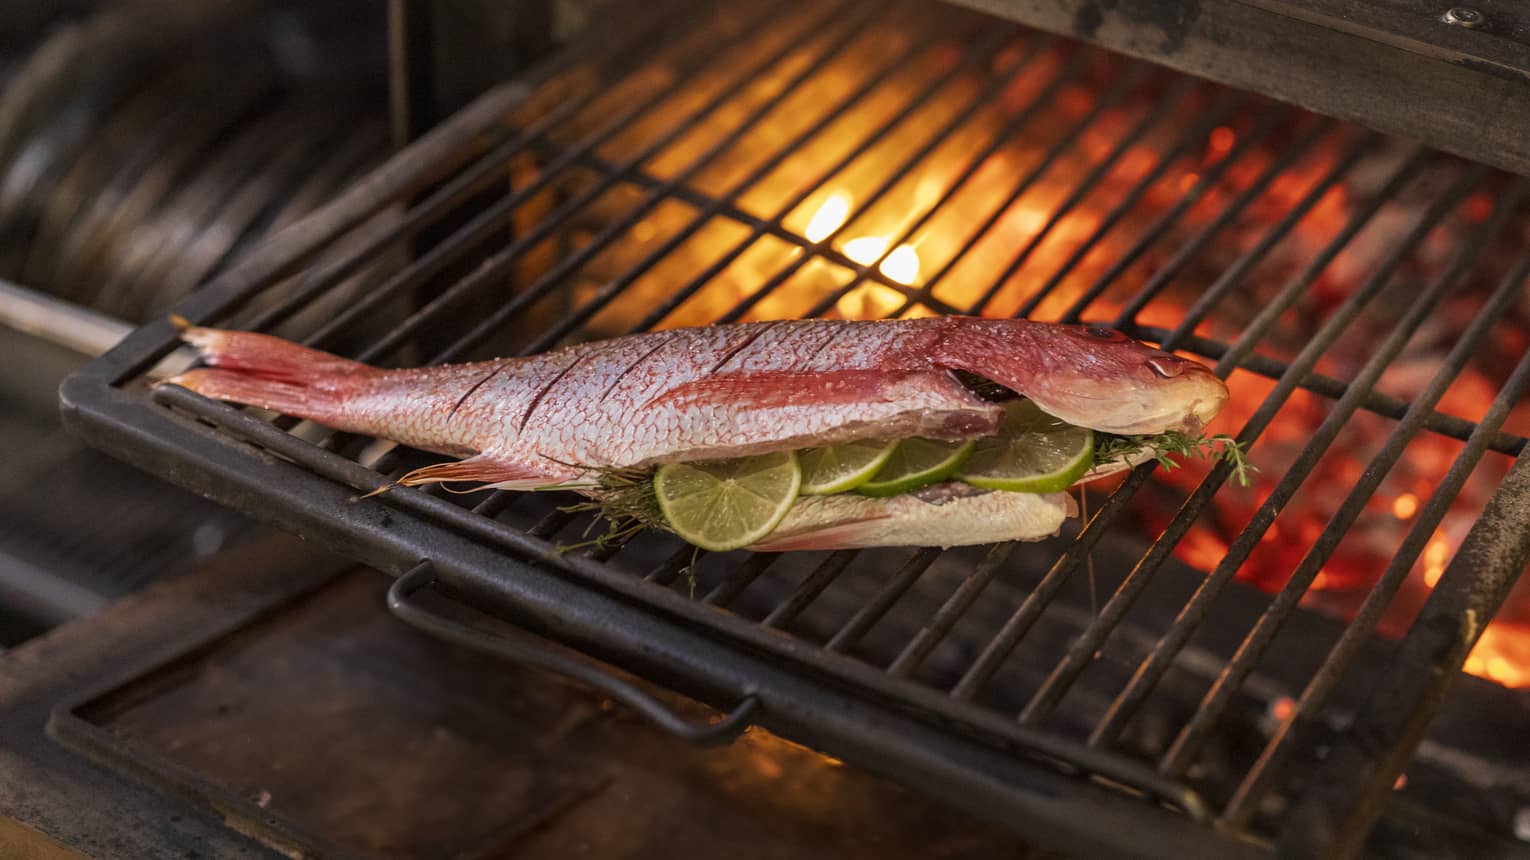 Whole grilled snapper stuffed with lime slices and greens sits on a wood-fire grill